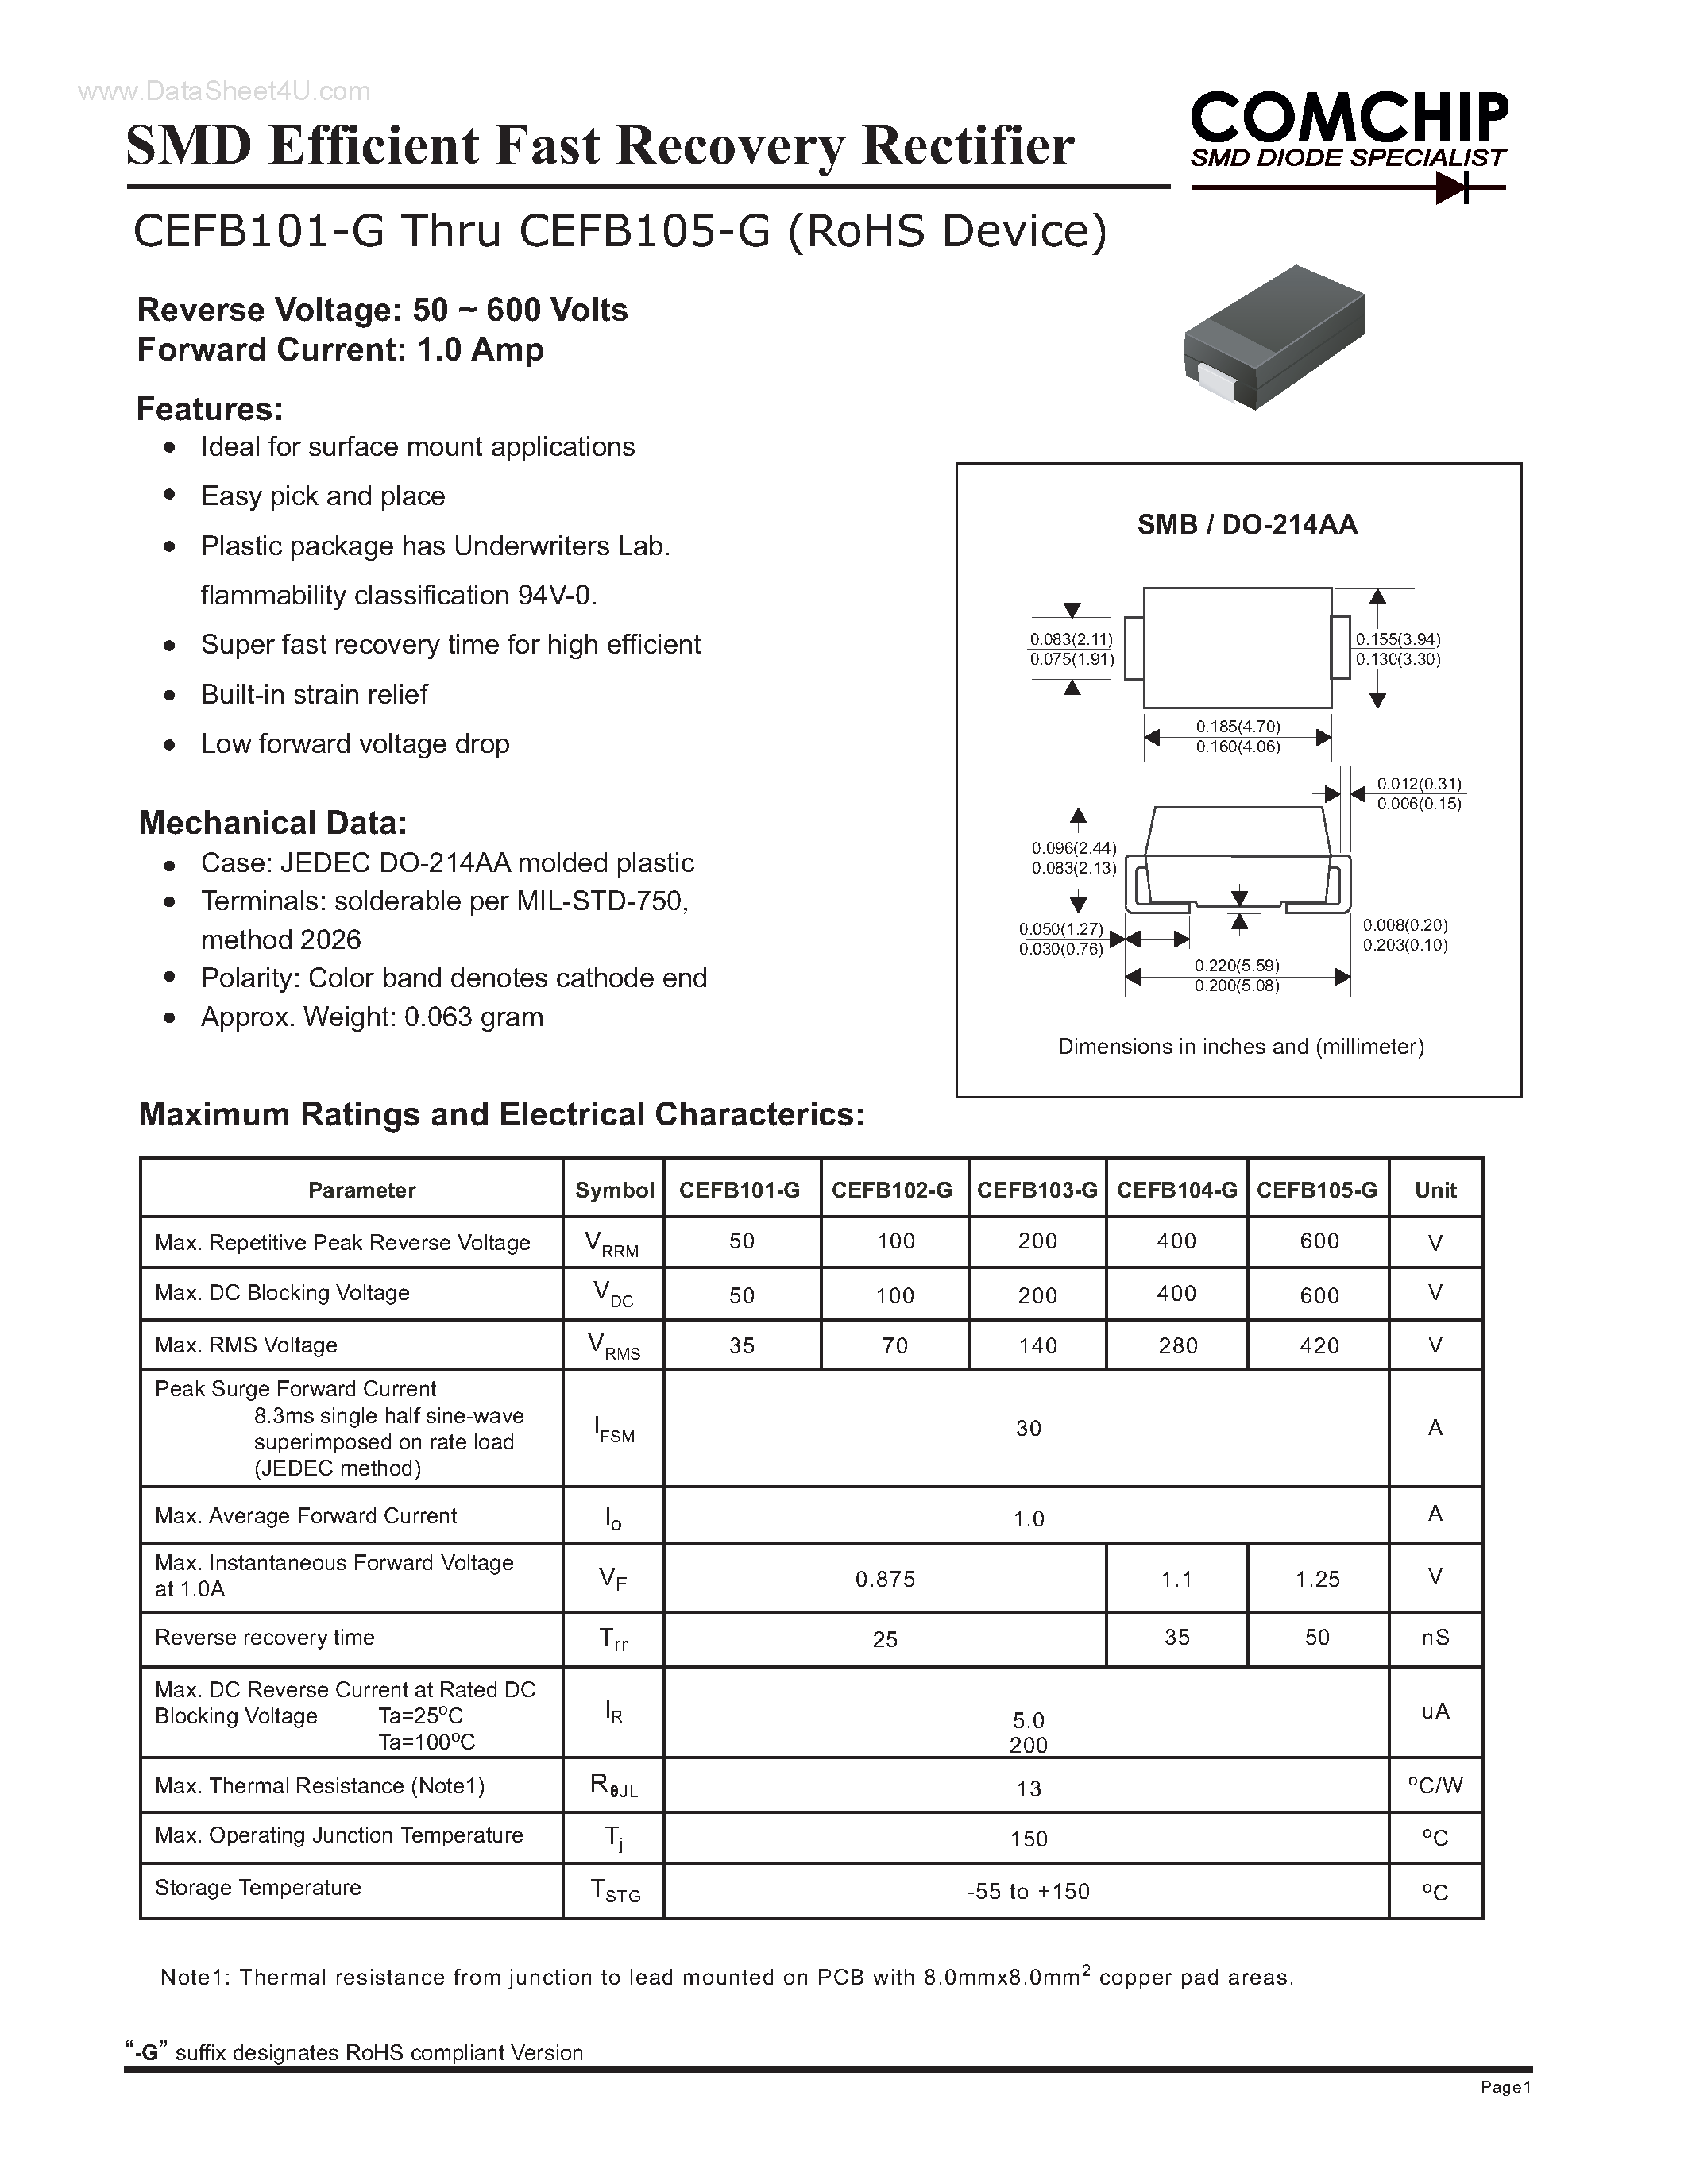 Datasheet CEFB101-G - (CEFB101-G - CEFB105-G) SMD Efficient Fast Recovery Rectifier page 1